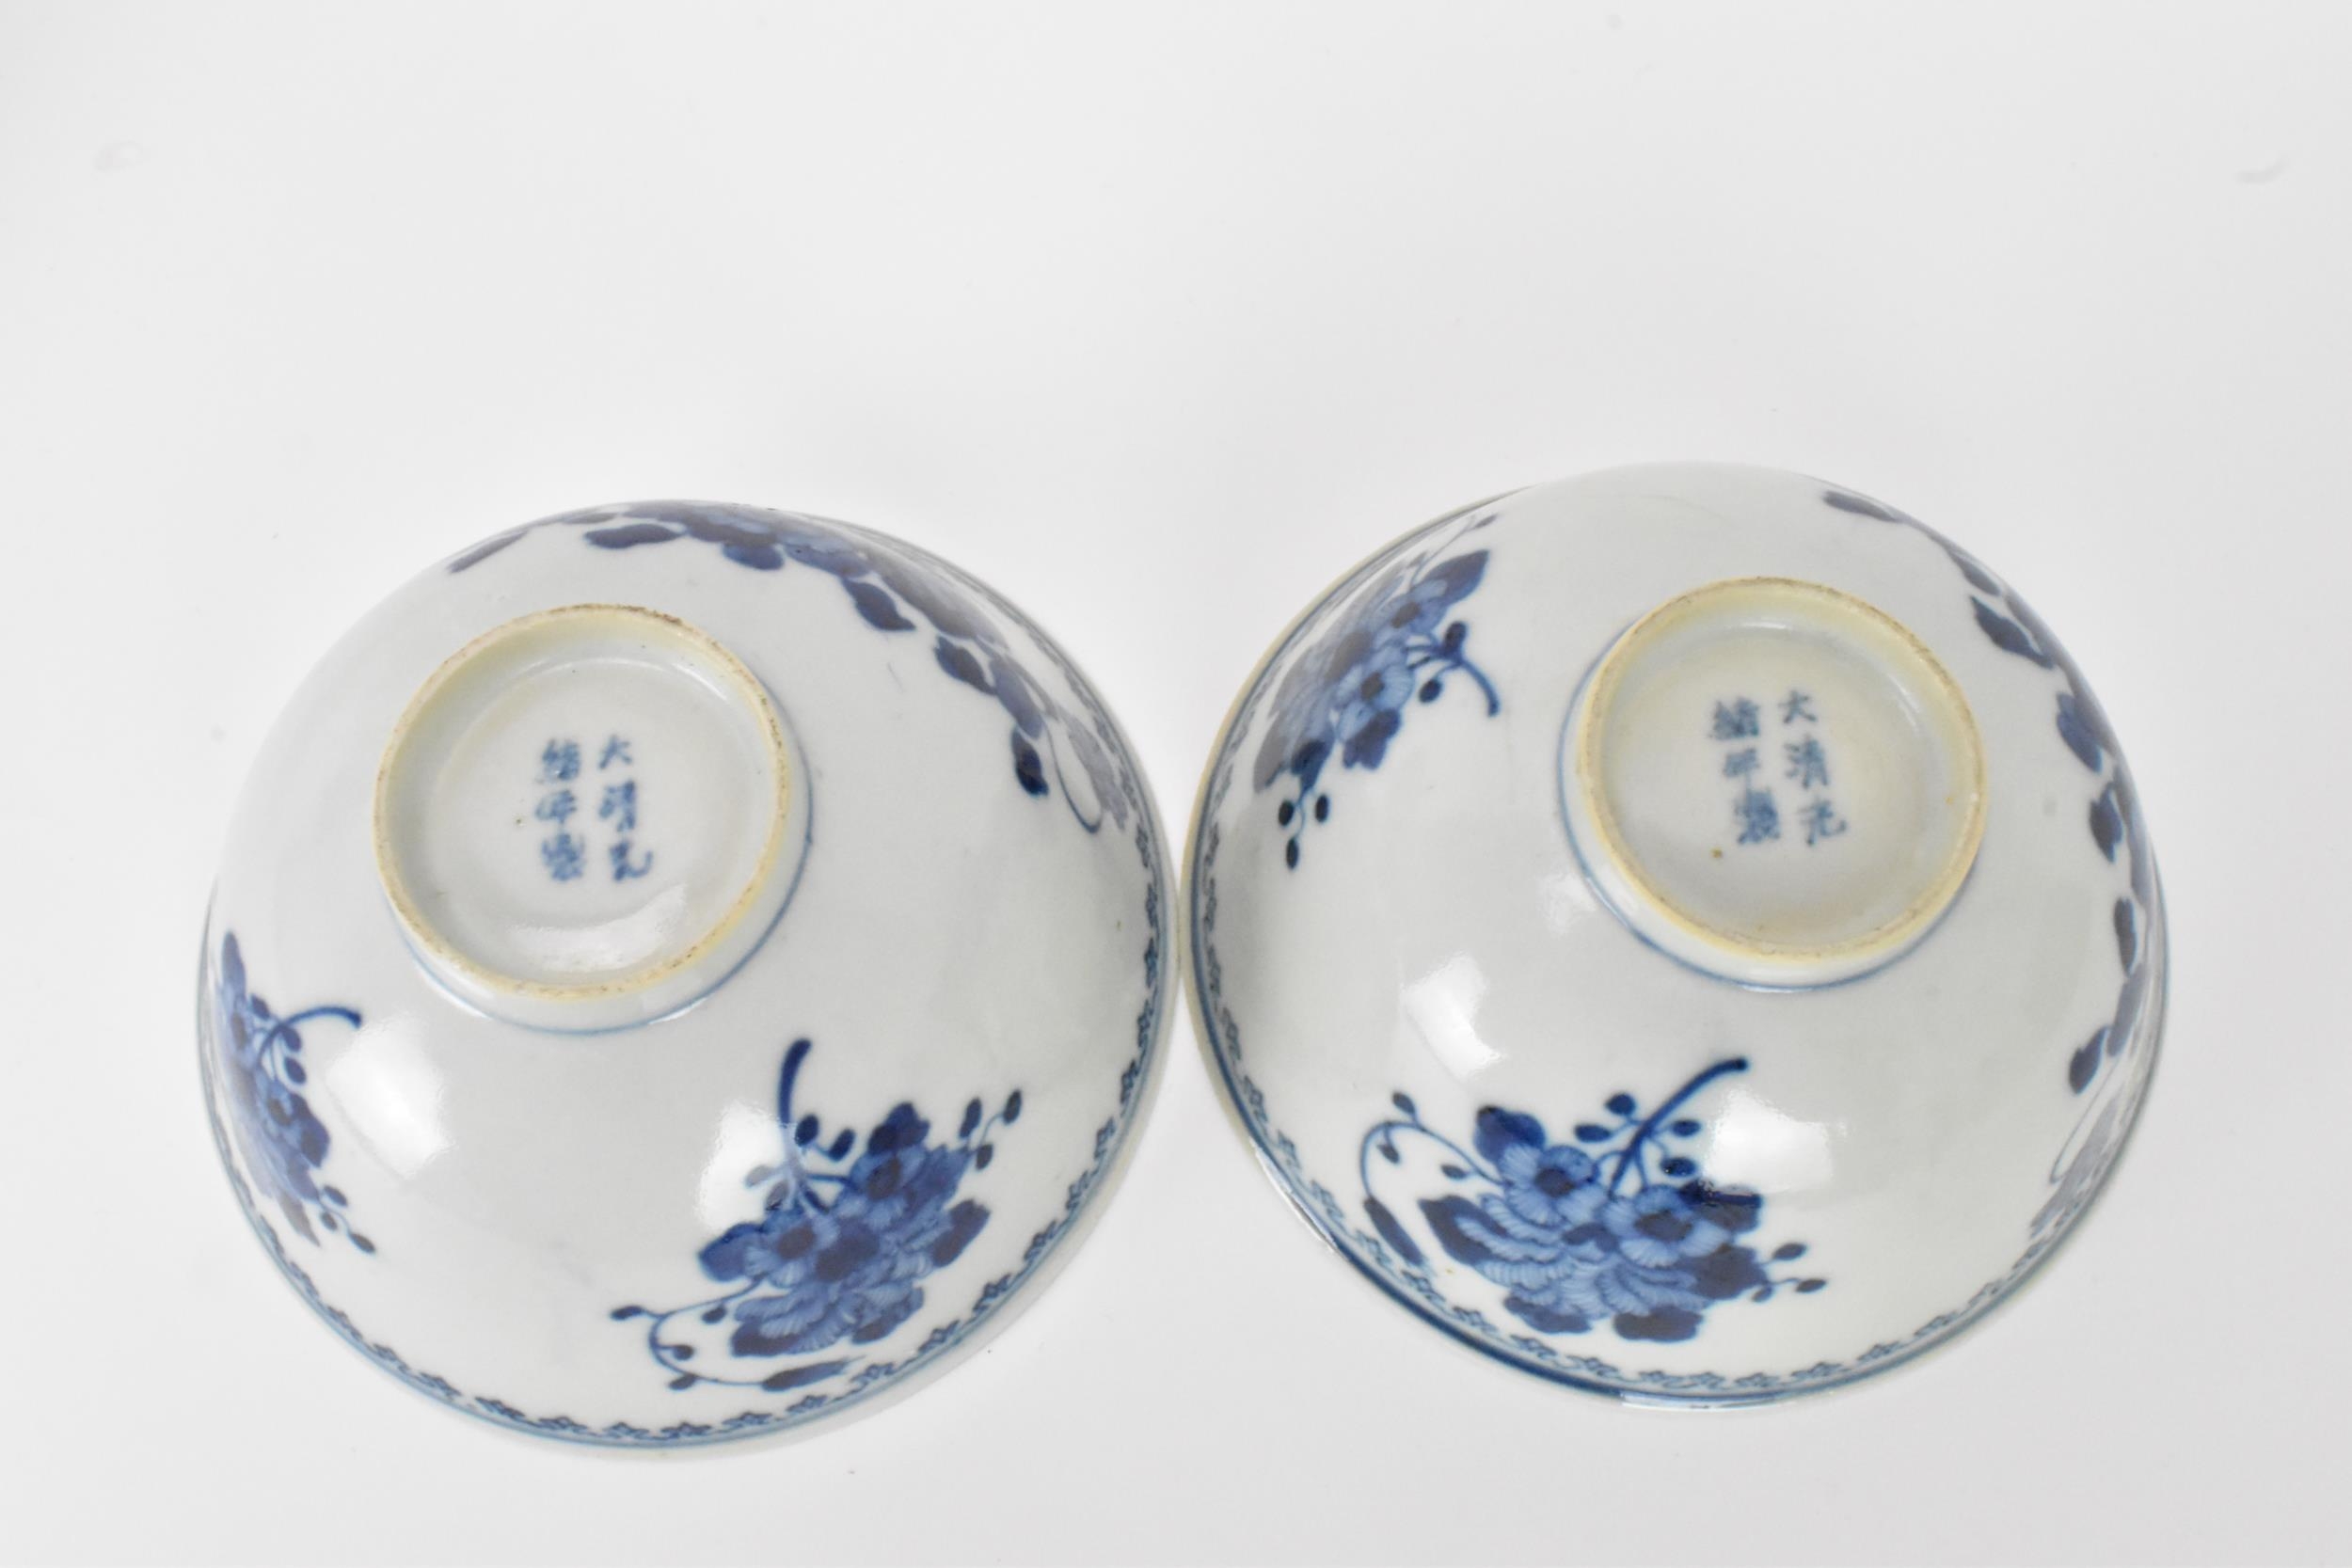 A set of four Qing dynasty, Guangxu period blue and white porcelain bowls, with floral decoration, - Image 6 of 9